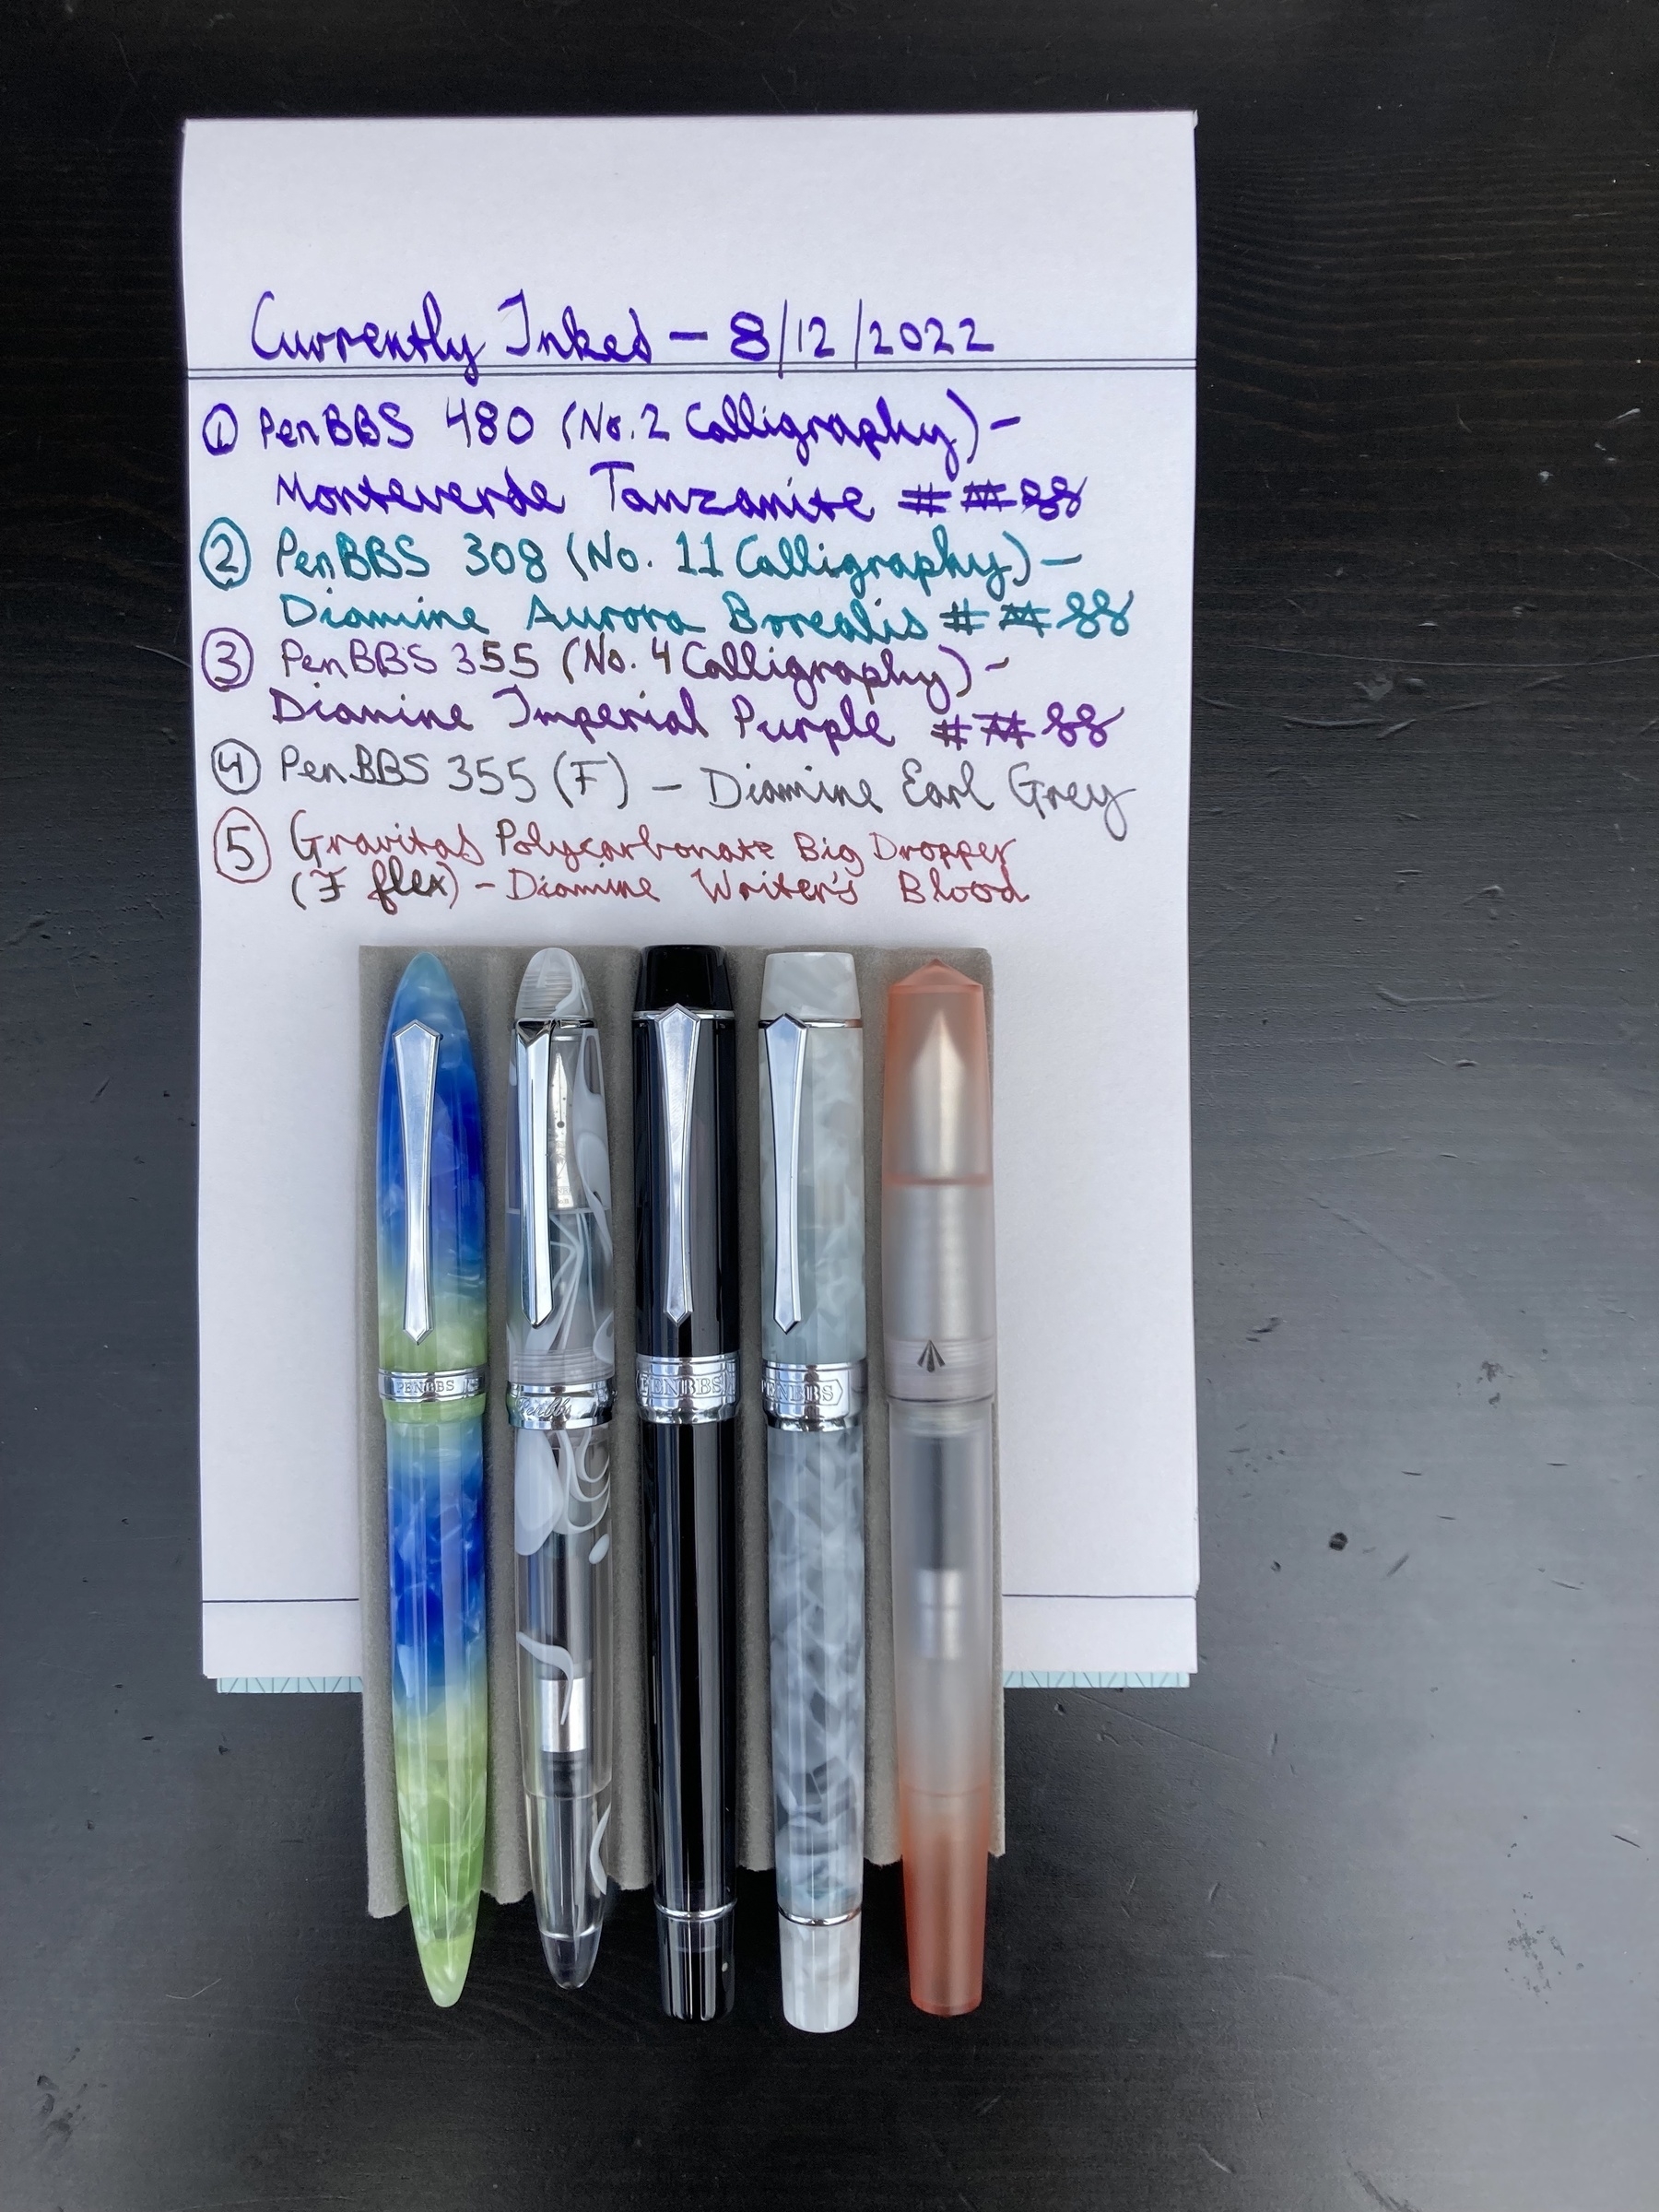 Pens and inks used for August 12, 2022.